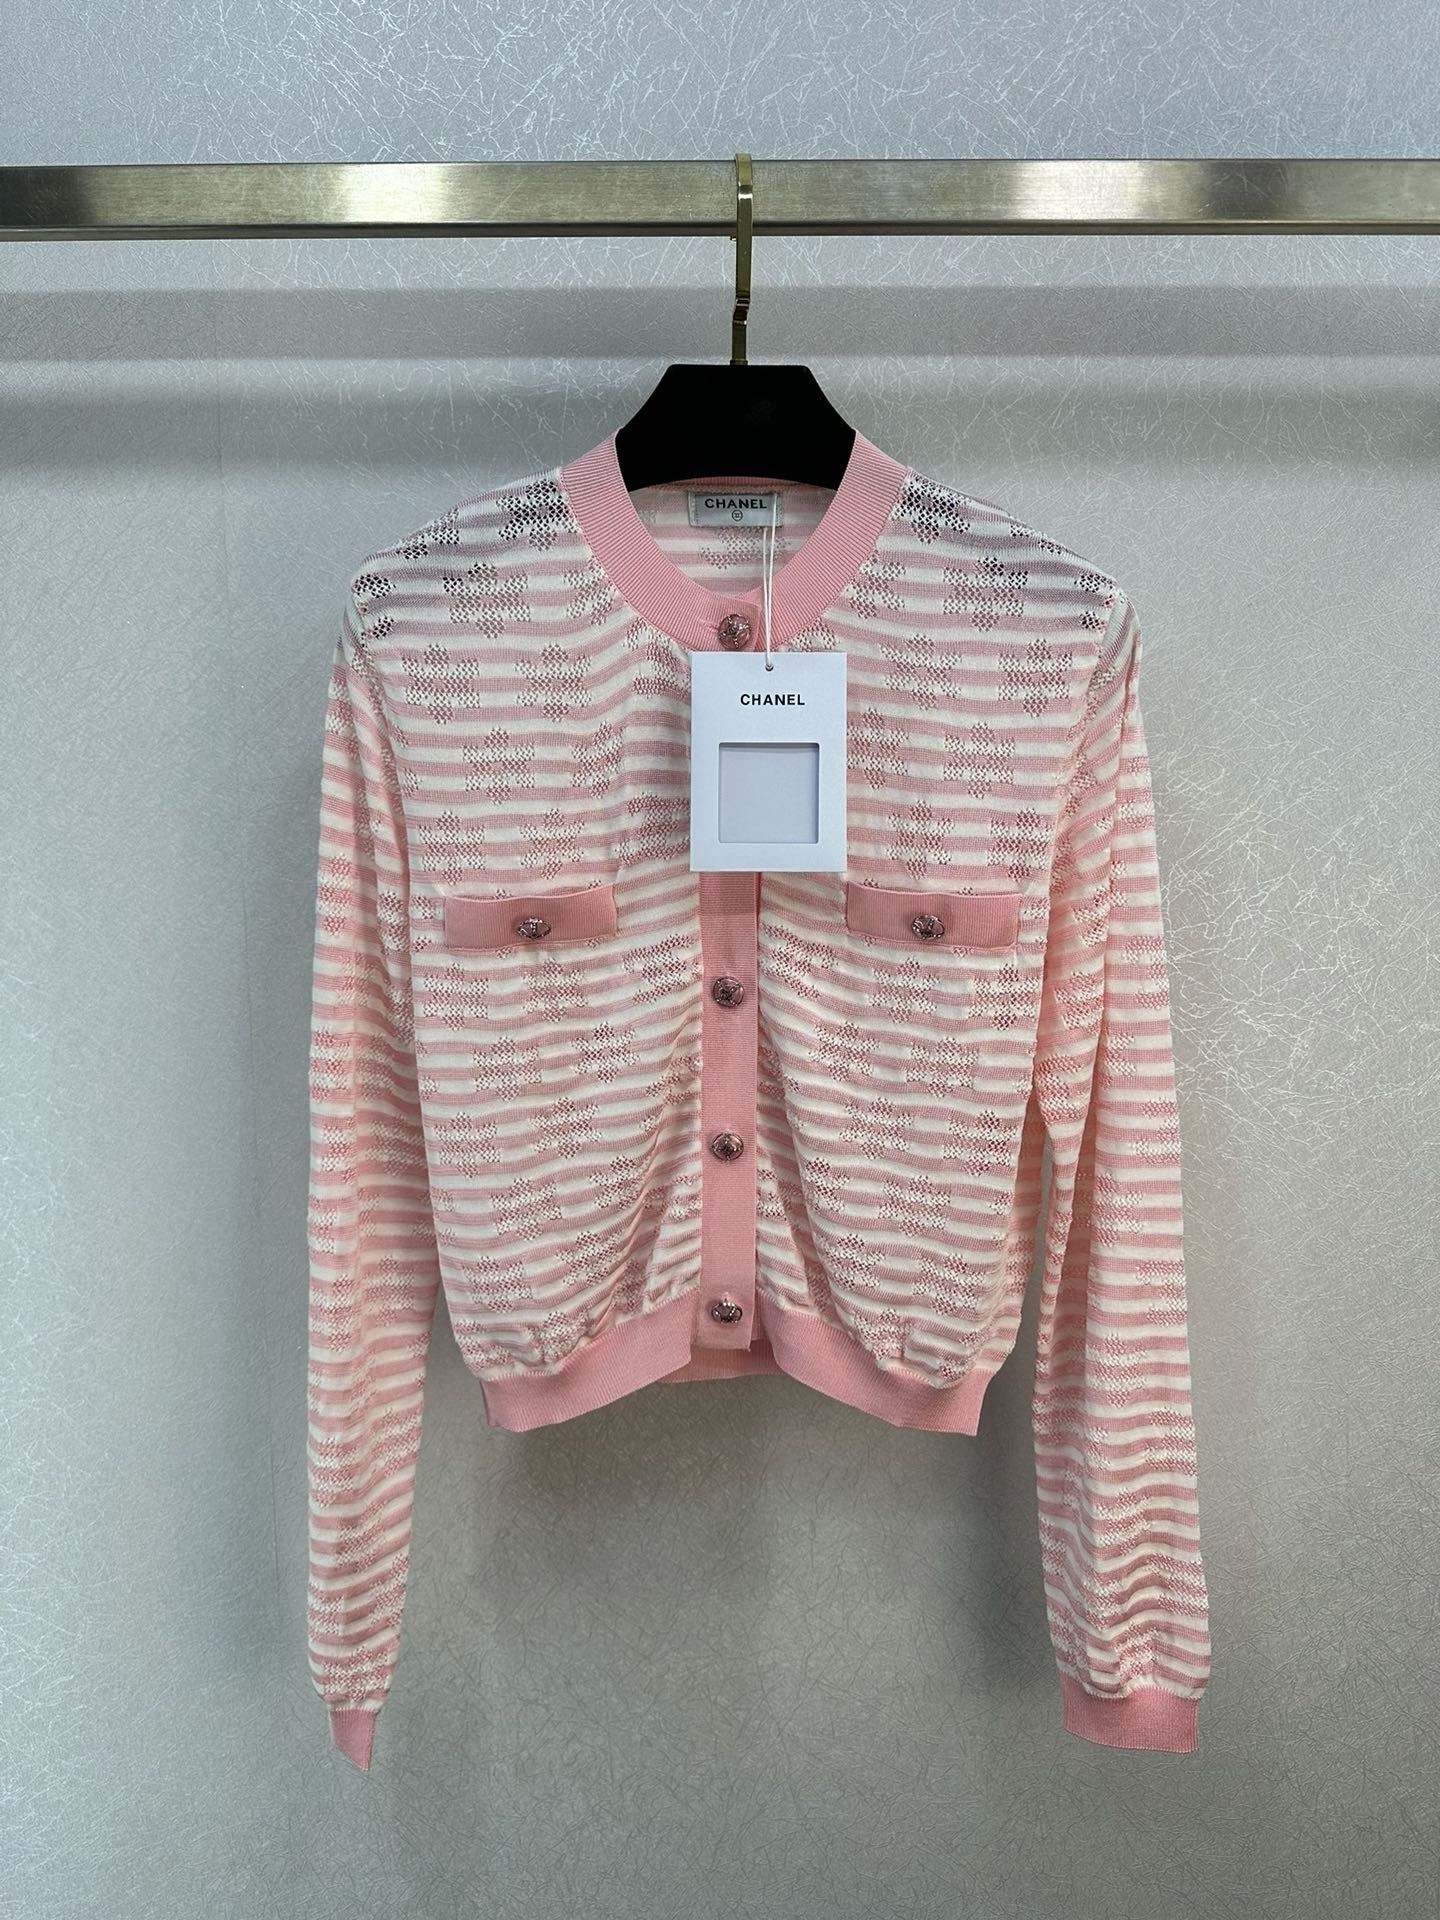 Chanel Clothing Cardigans Knit Sweater Pink White Openwork Knitting Spring Collection